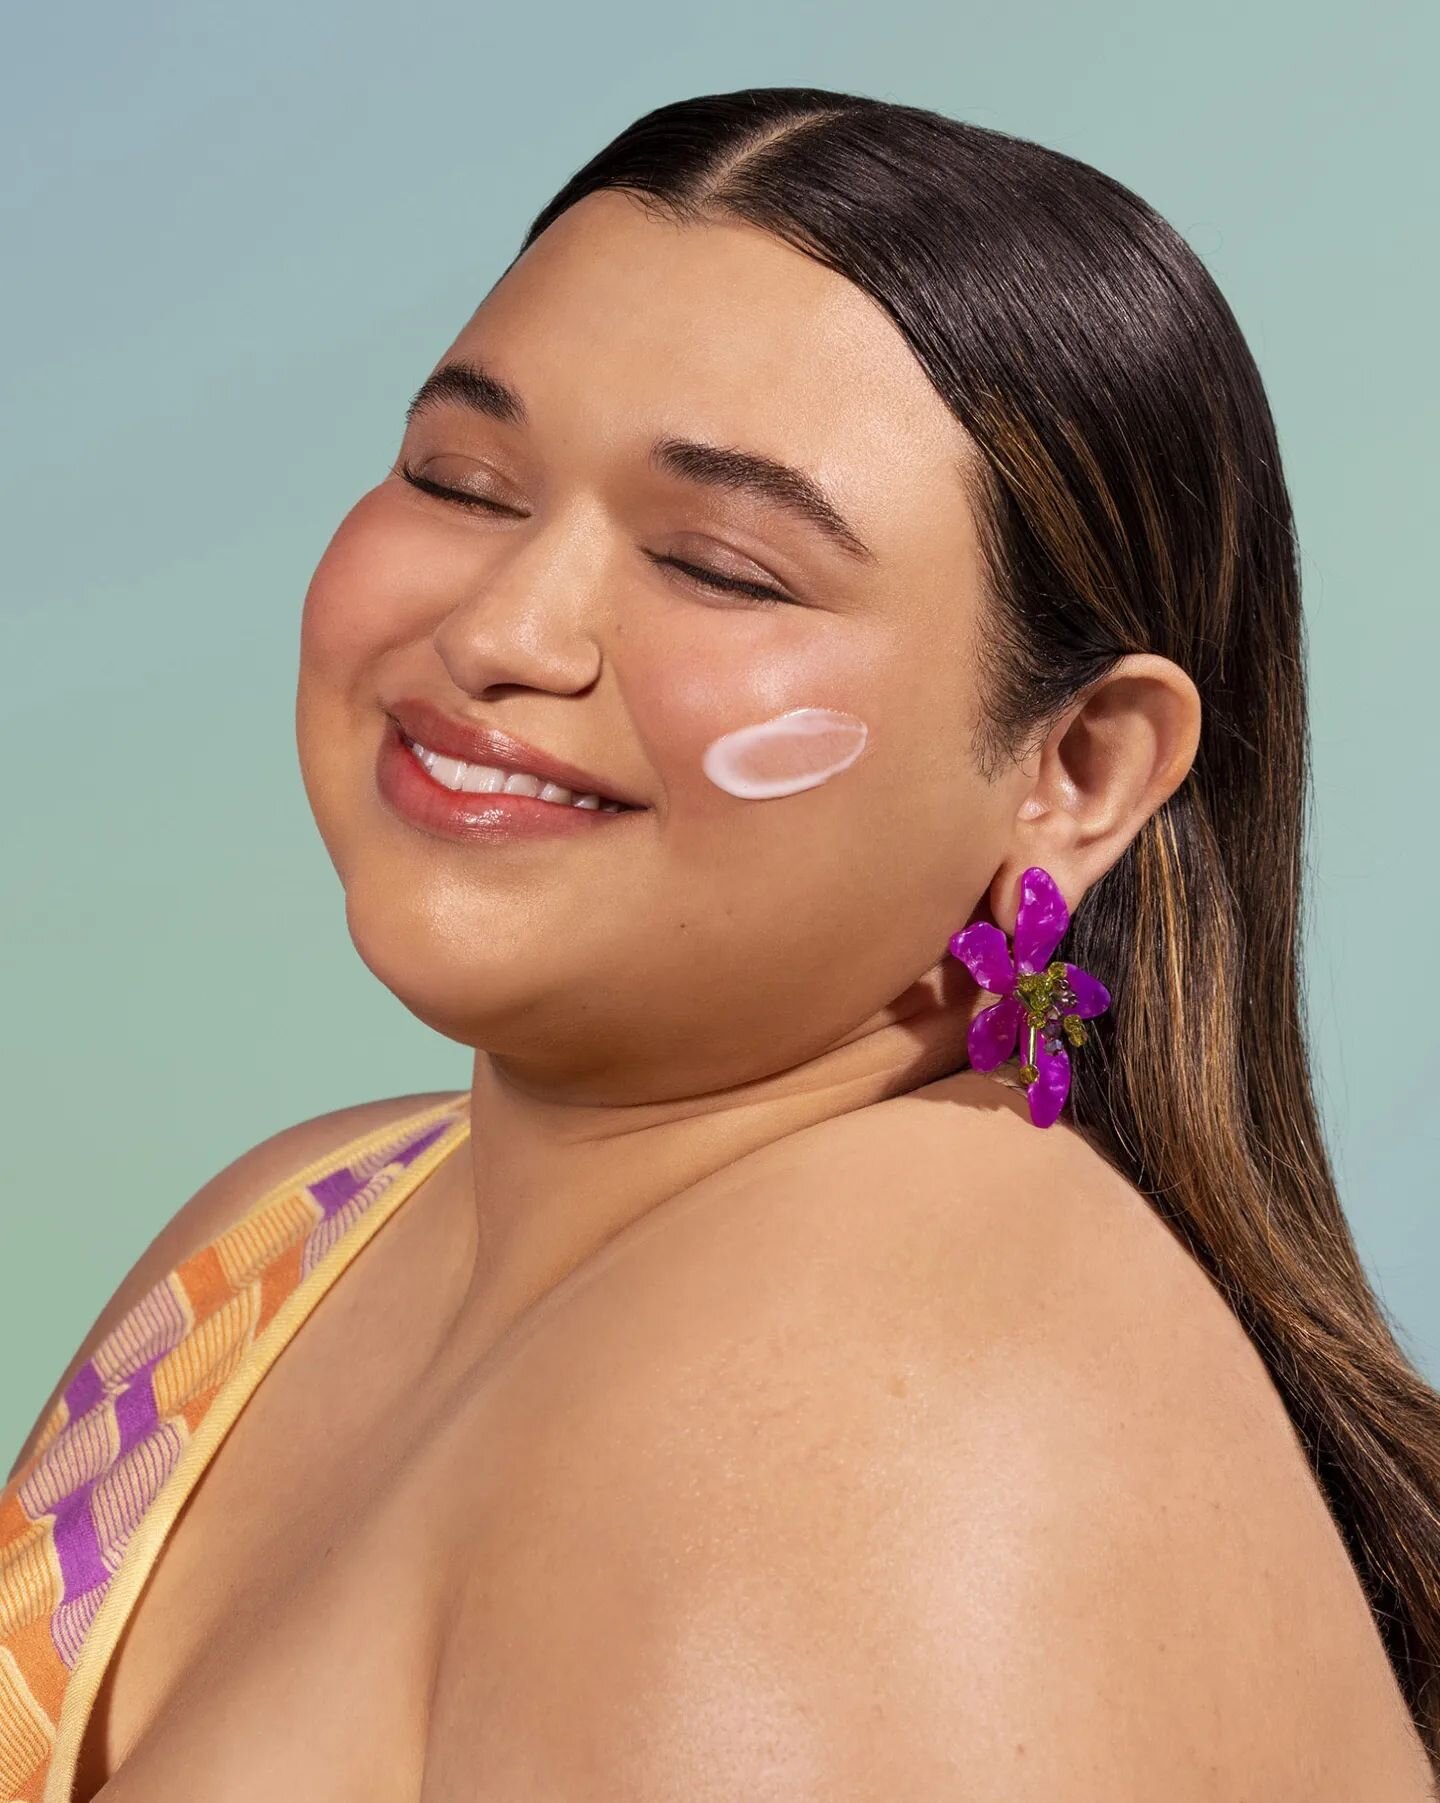 I shot a skincare campaign! With adorable humans from the internet! For @bubble!

Introducing the Super Clear Serum, 2% Salicylic Acid that banishes acne without drying your skin out. 

Huge thank you to the team @LjStClair, @SarahCaswell, @LaurenPla